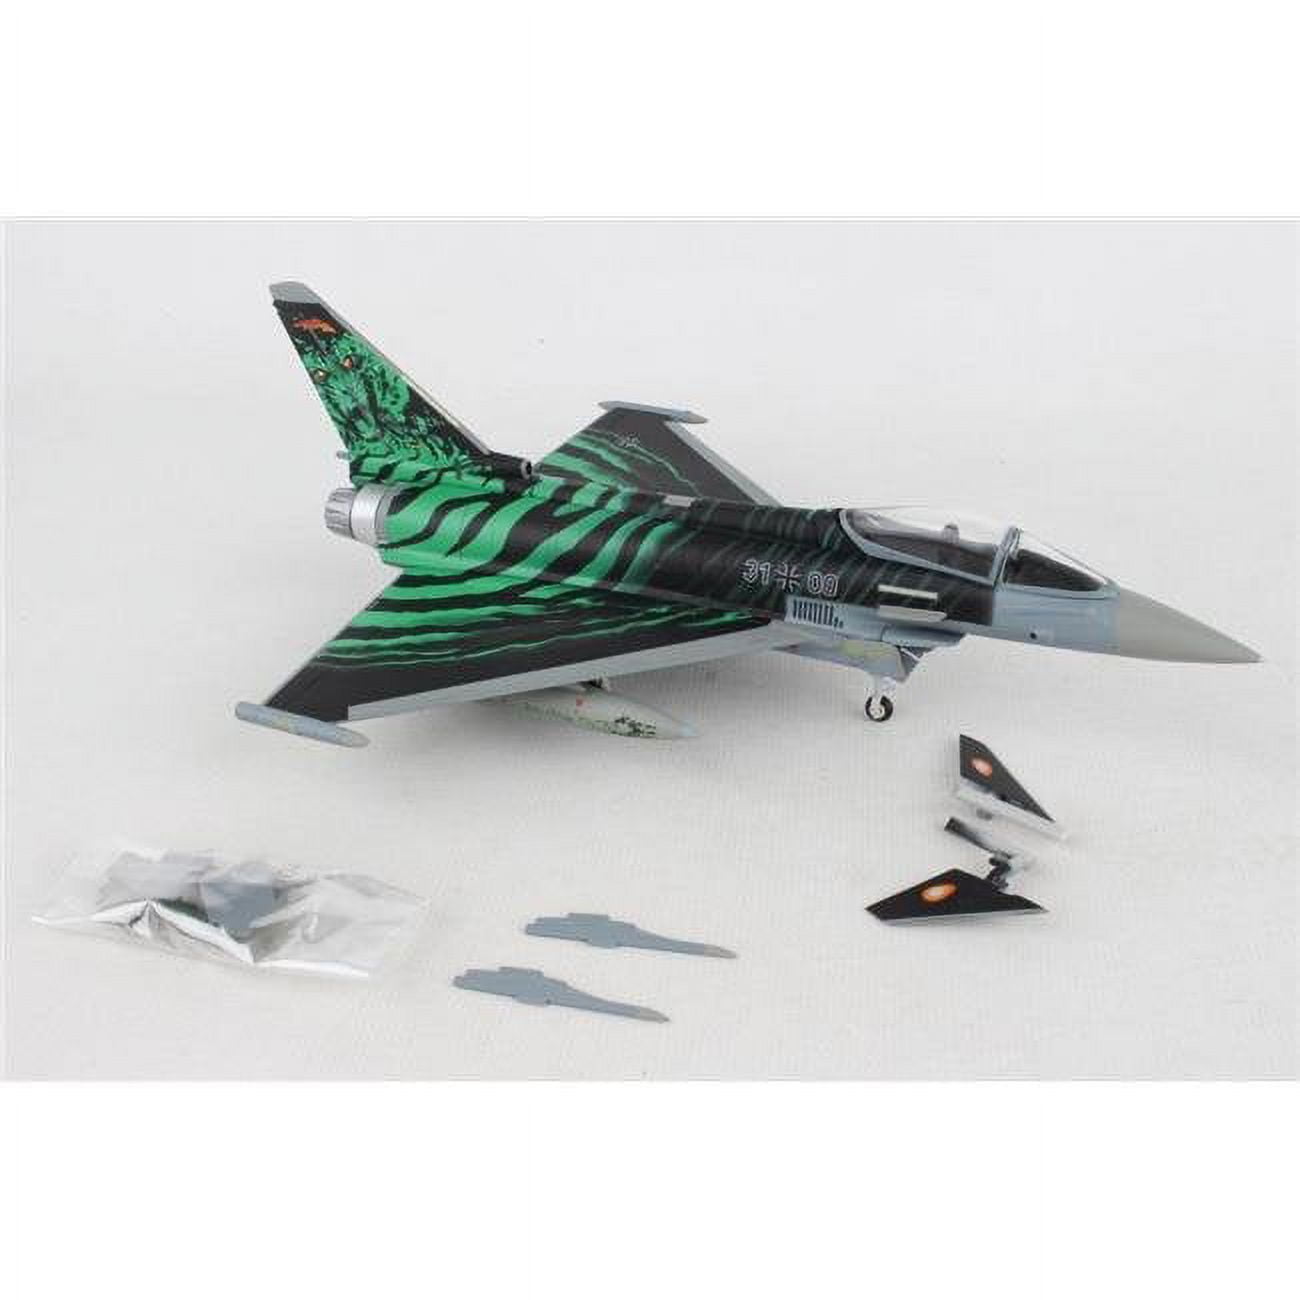 He580427 1 By 72 Scale Luftwaffe Eurofighter Typhoon Lwg74 Ghost Tiger Model Aircraft